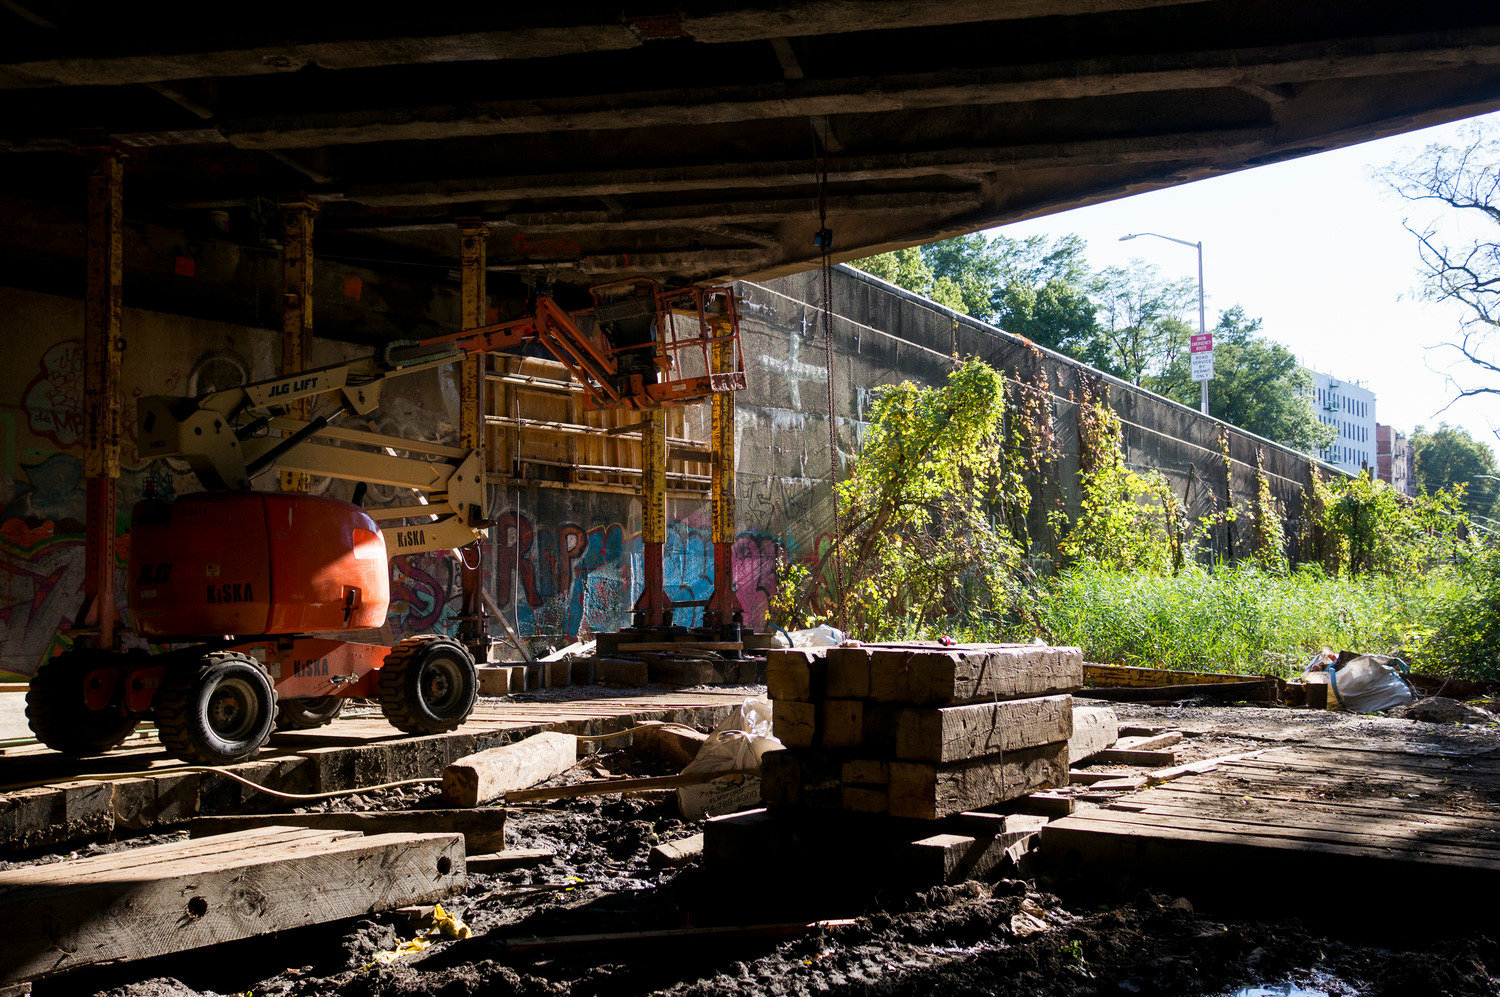 After years of waiting, CSX Transportation removed decades of trash and debris from what was once its Putnam Line tracks along the Major Deegan Expressway. City officials now hope to turn this stretch of land into not only a linear park through the Kingsbridge business district, but also a return of the now-underground Tibbett Brook.